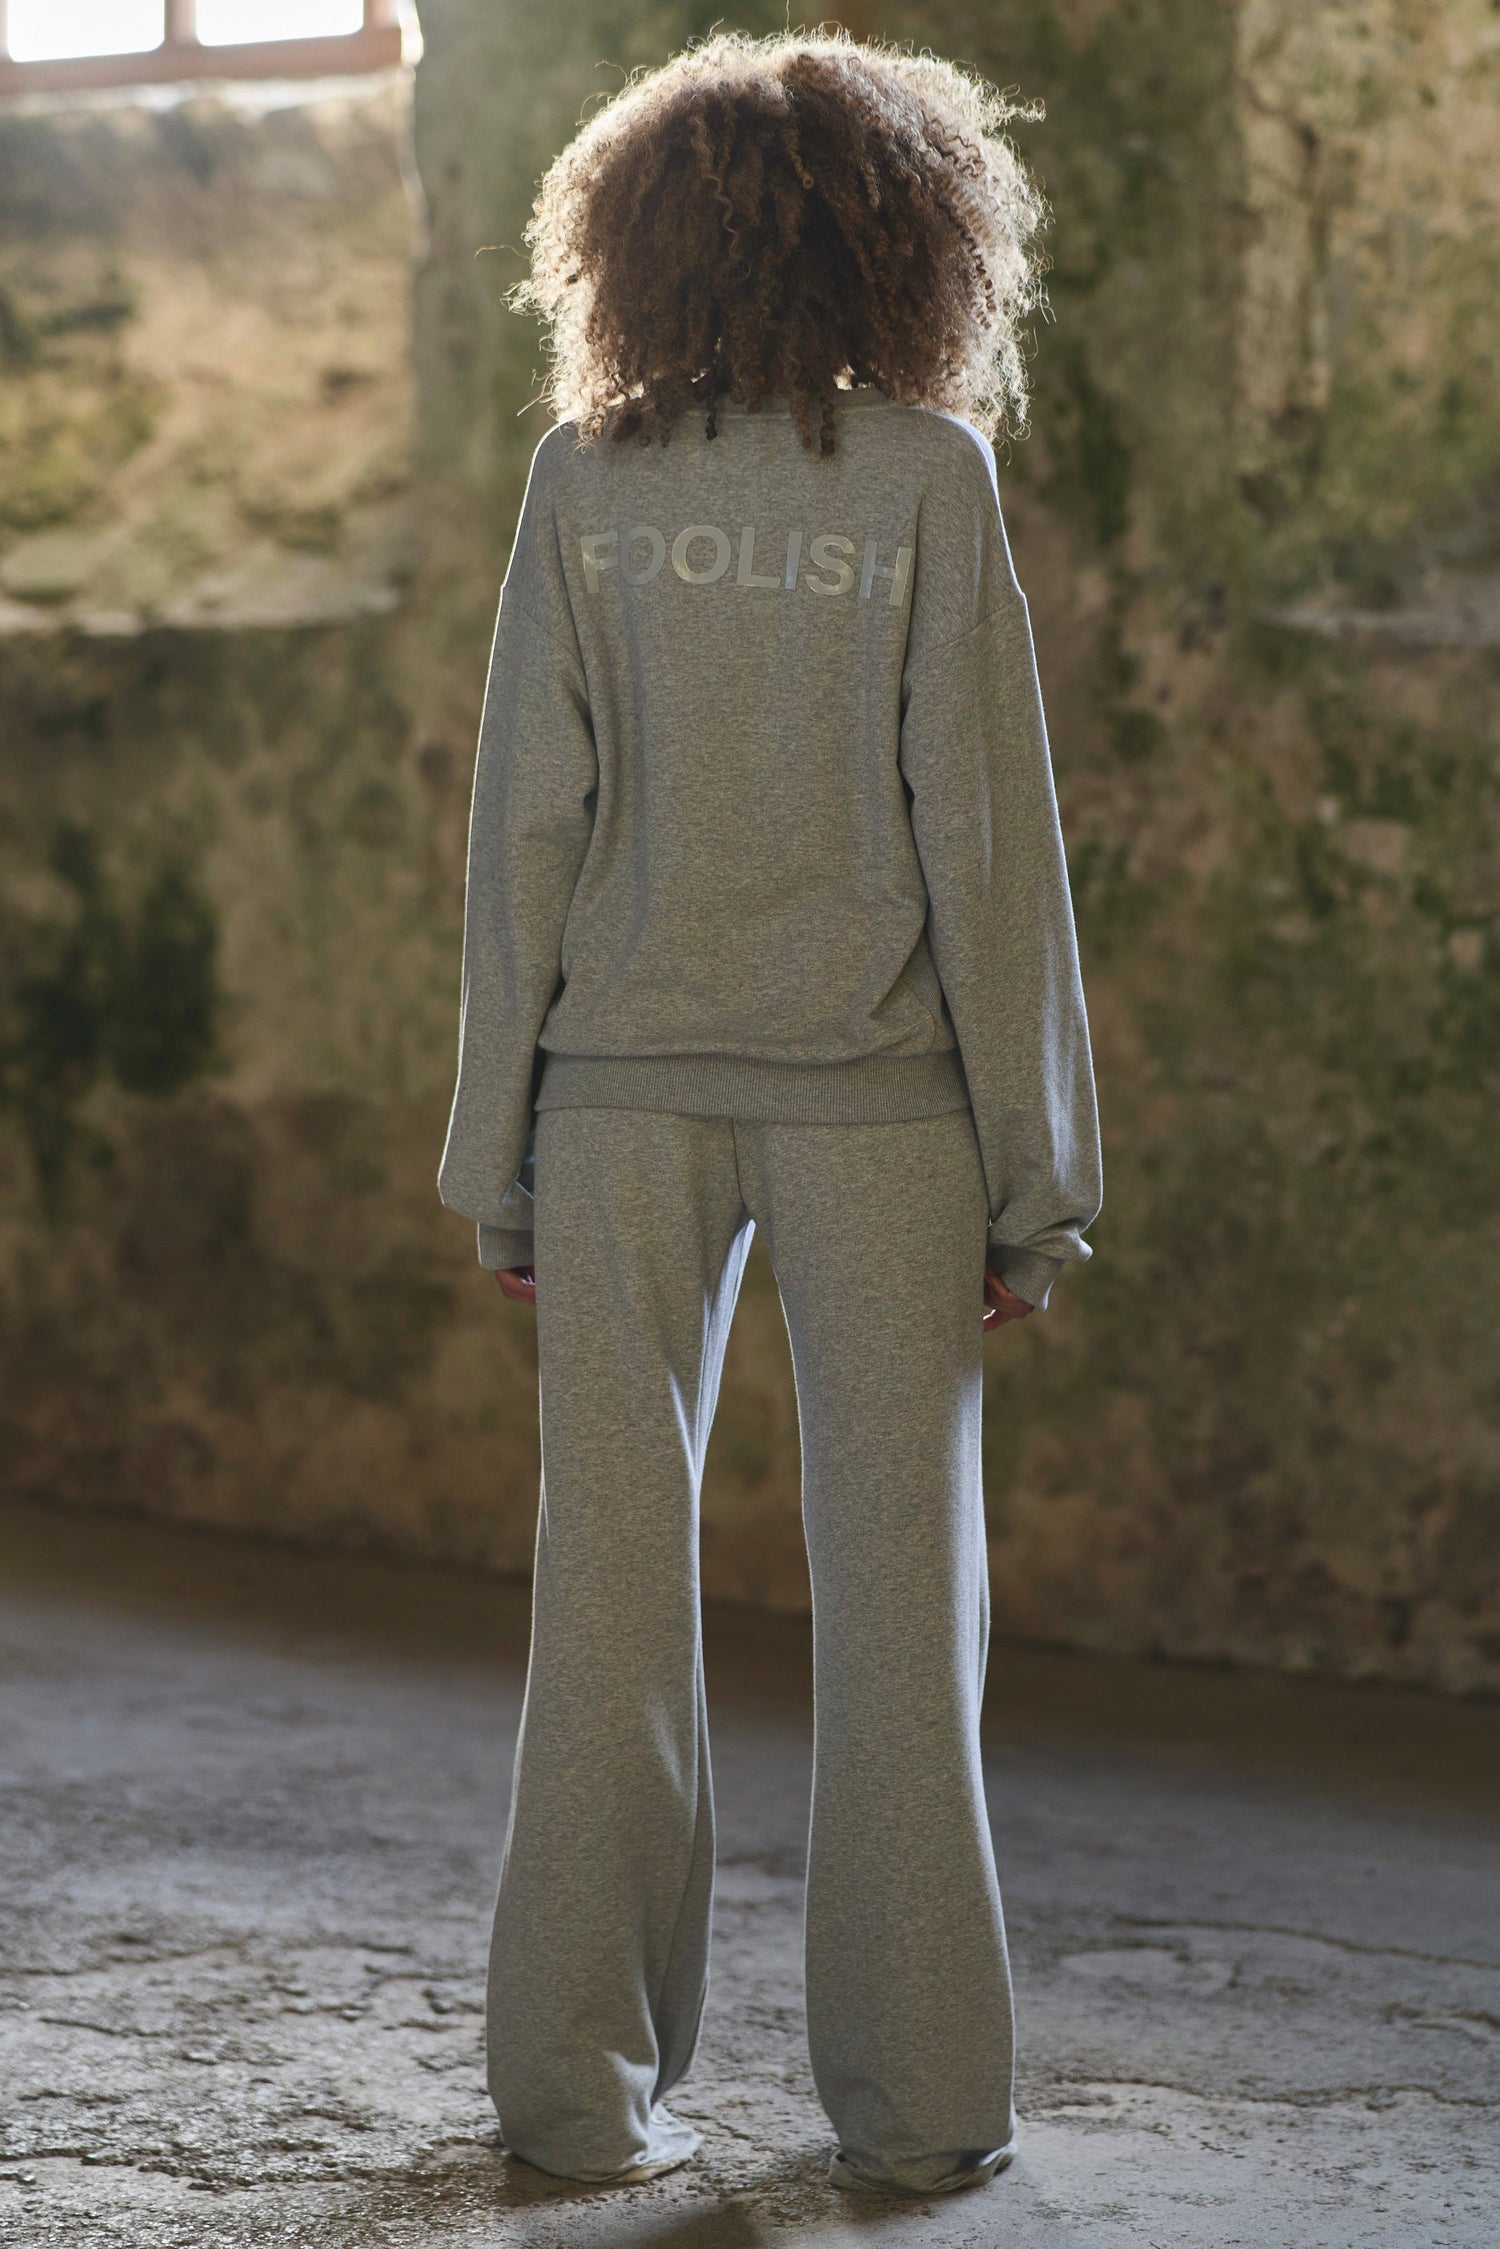 back image of model styled in grey luxury tracksuit 